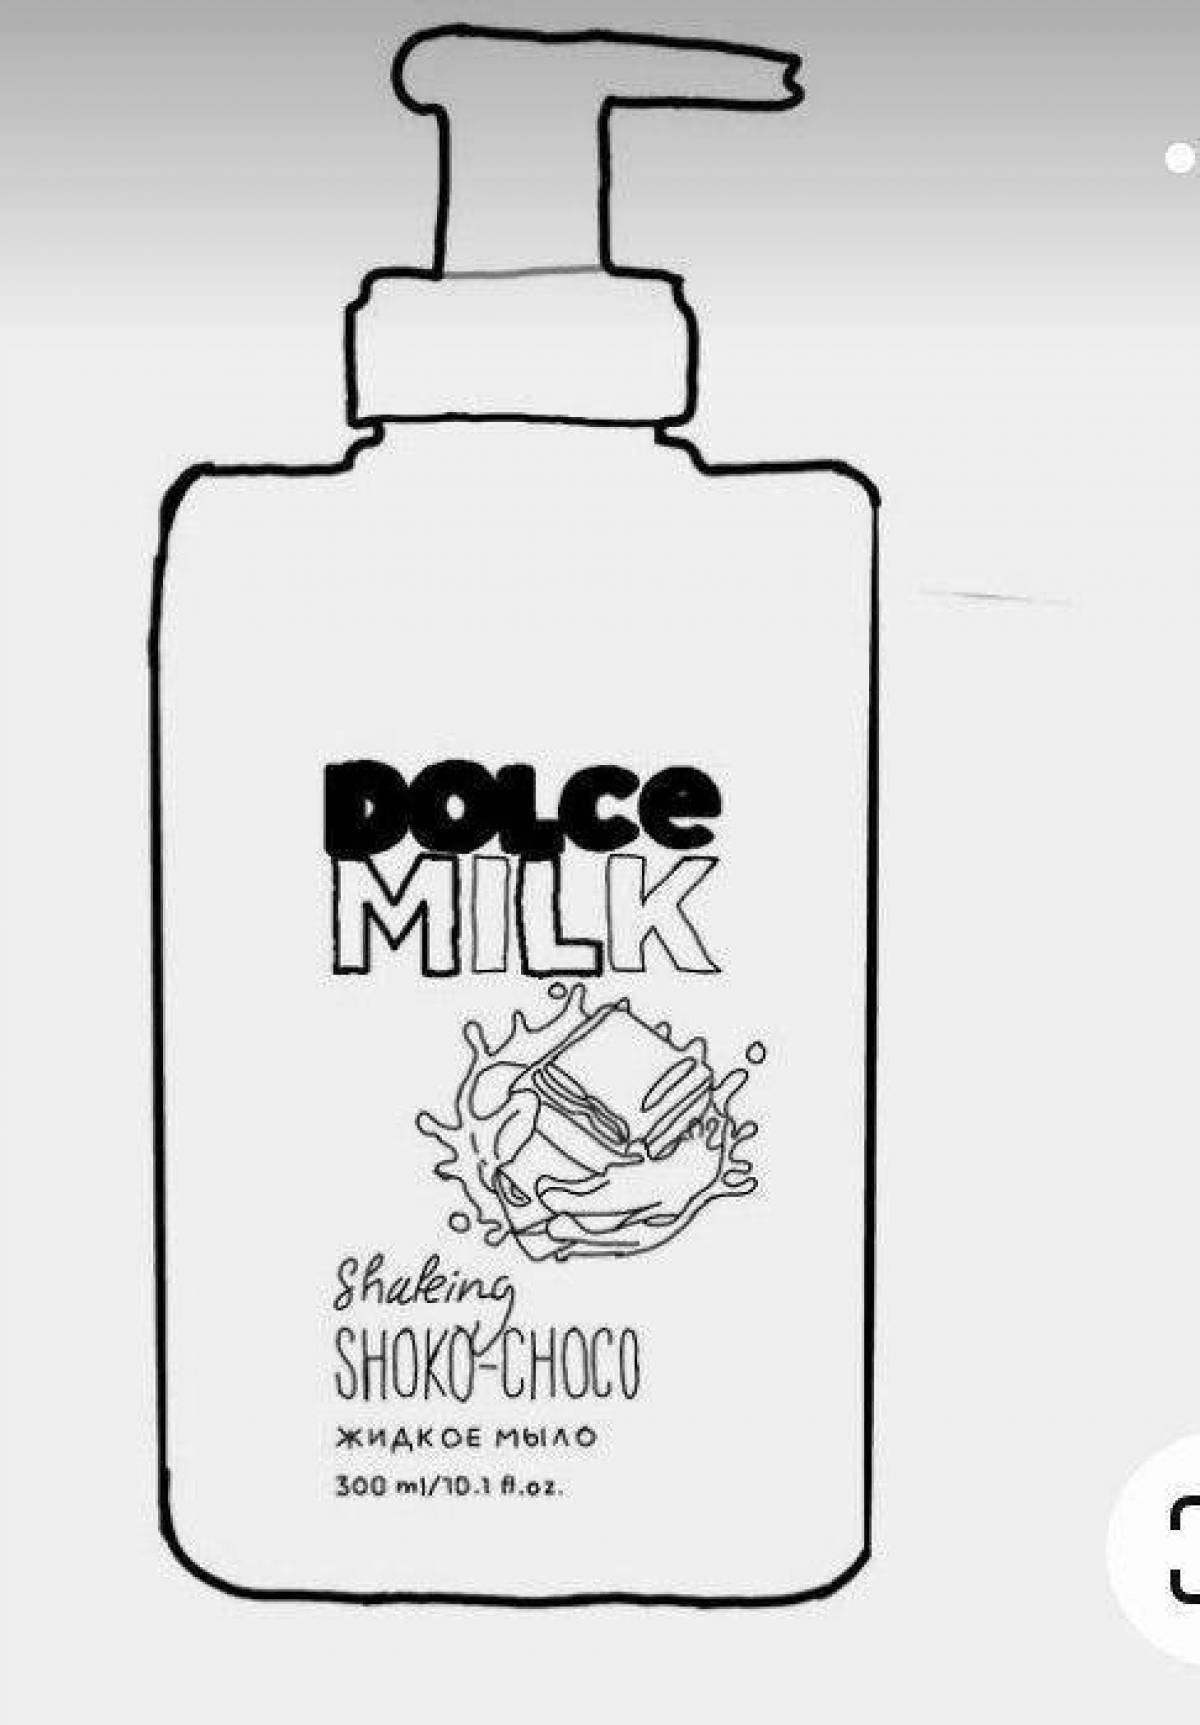 Dolce milk duck wonderful coloring book